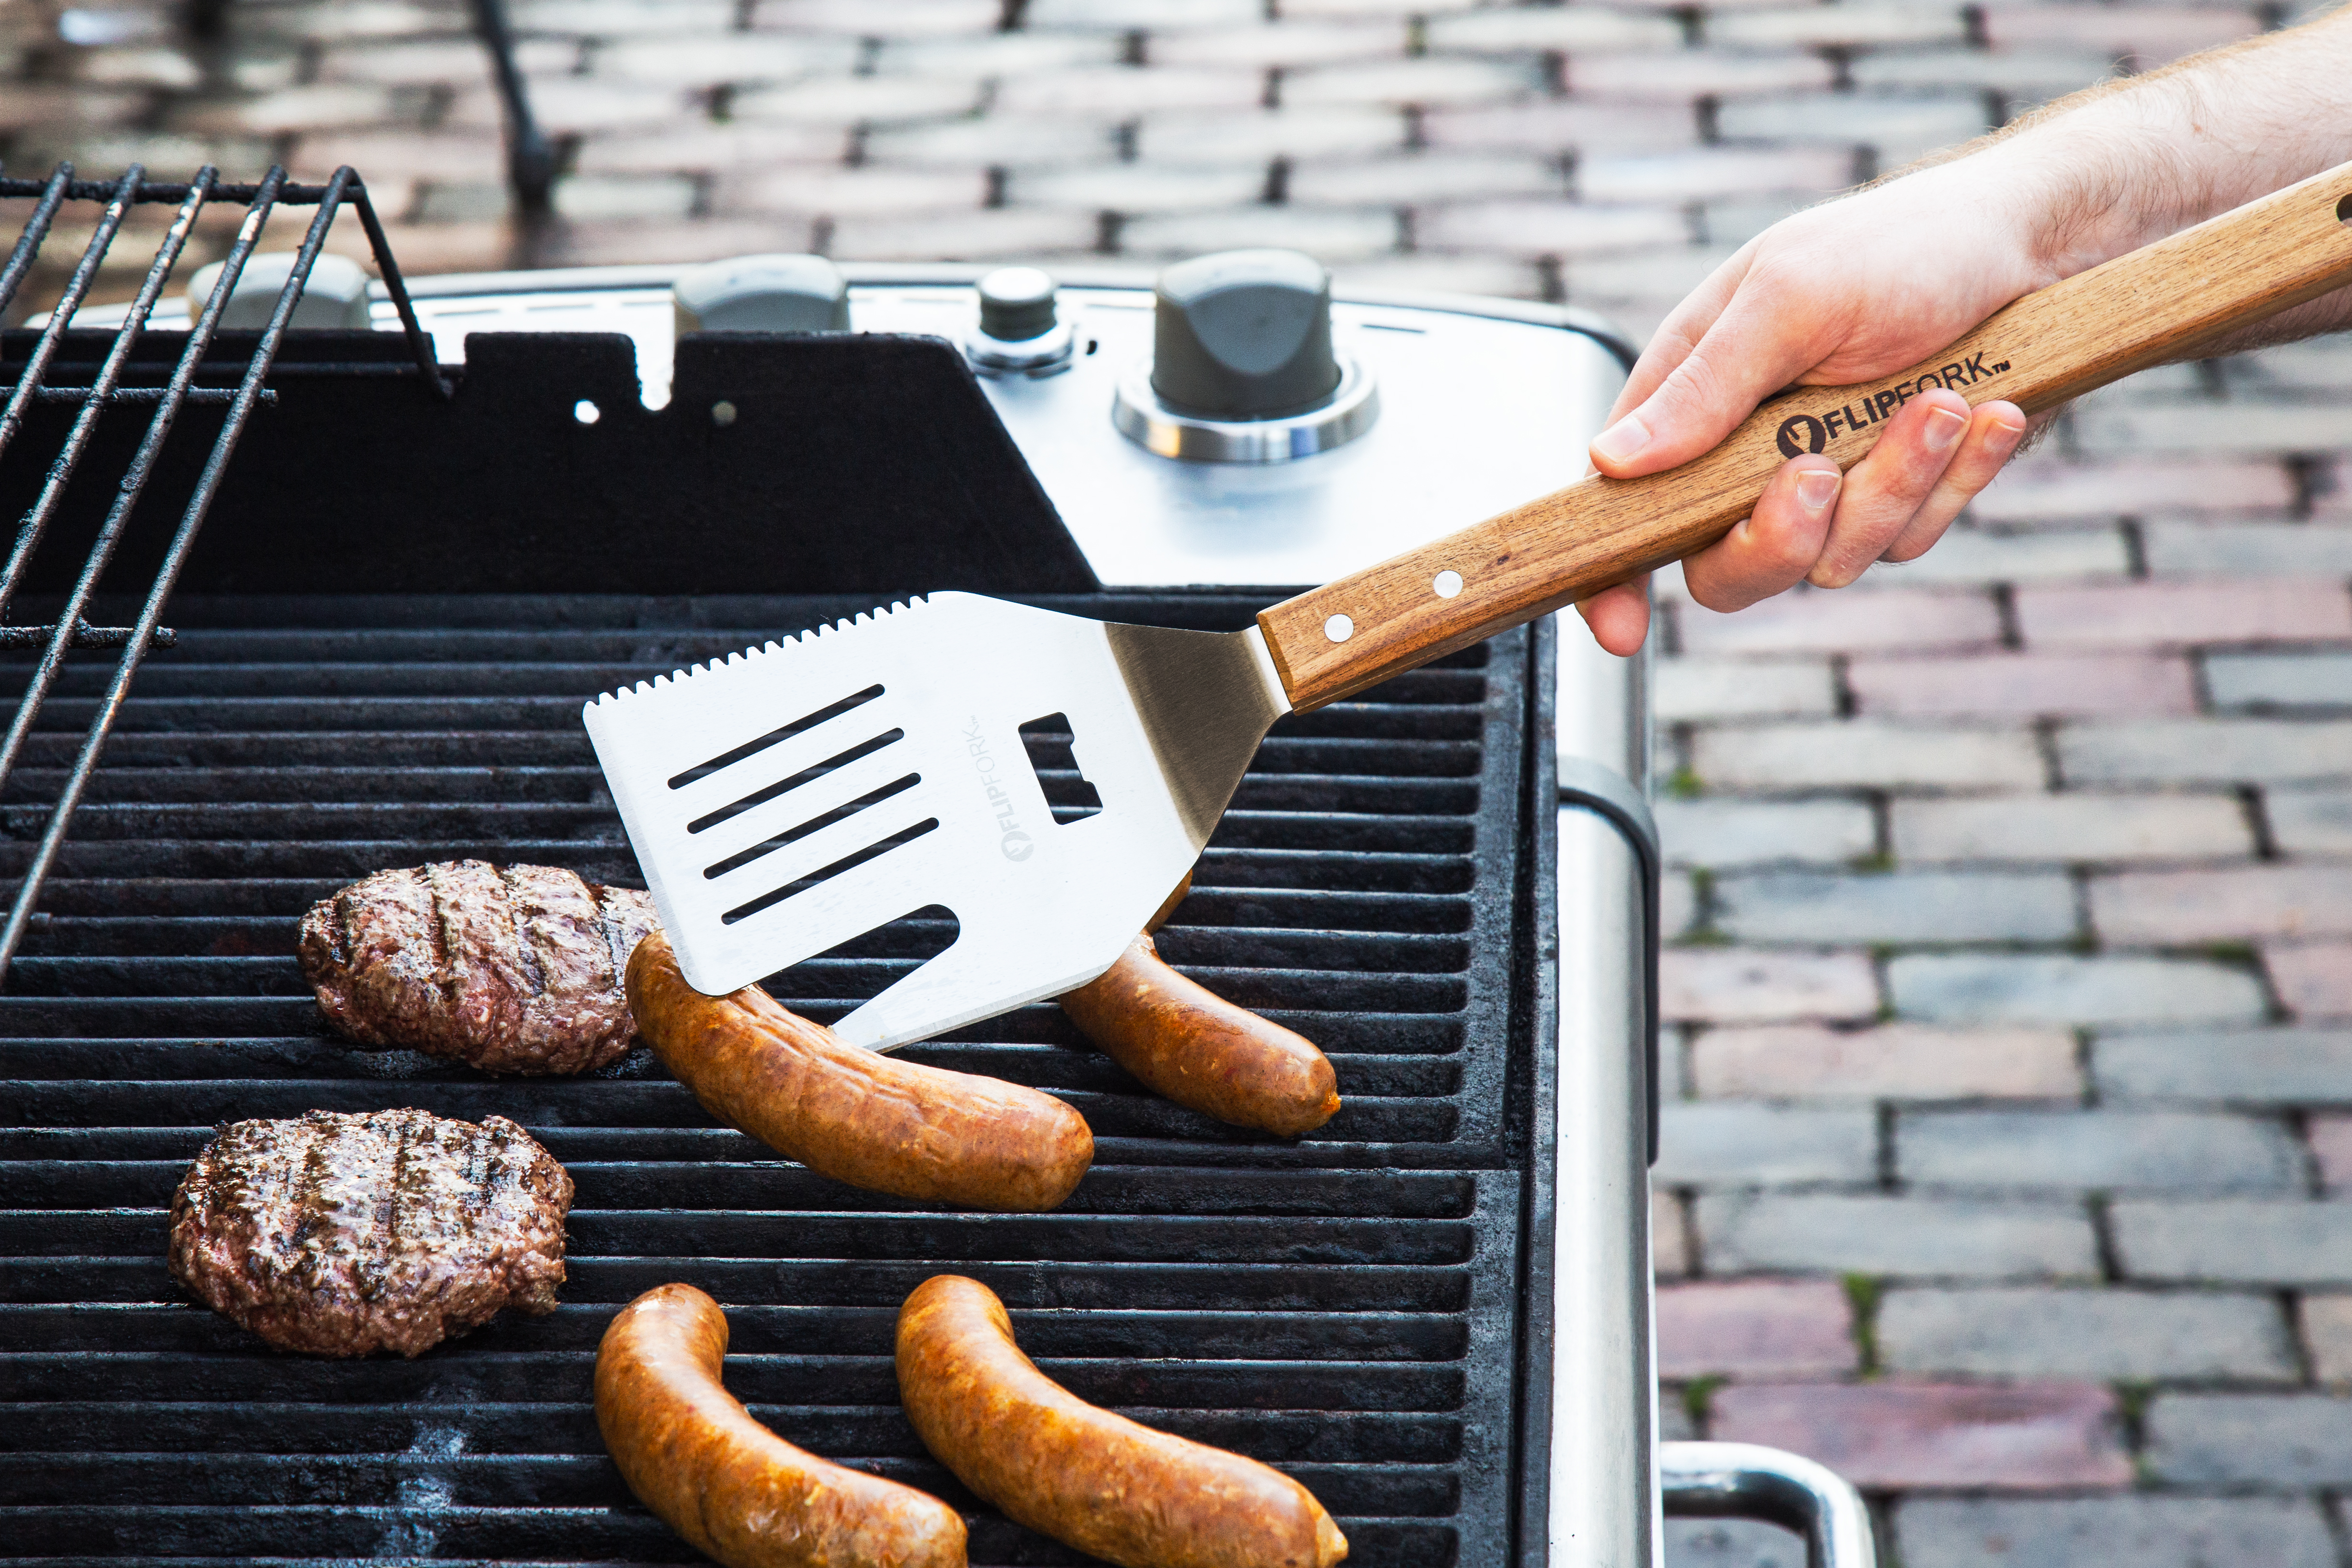 grilling burgers & sausages with MyFlipFork 5-in-1 grill spatula